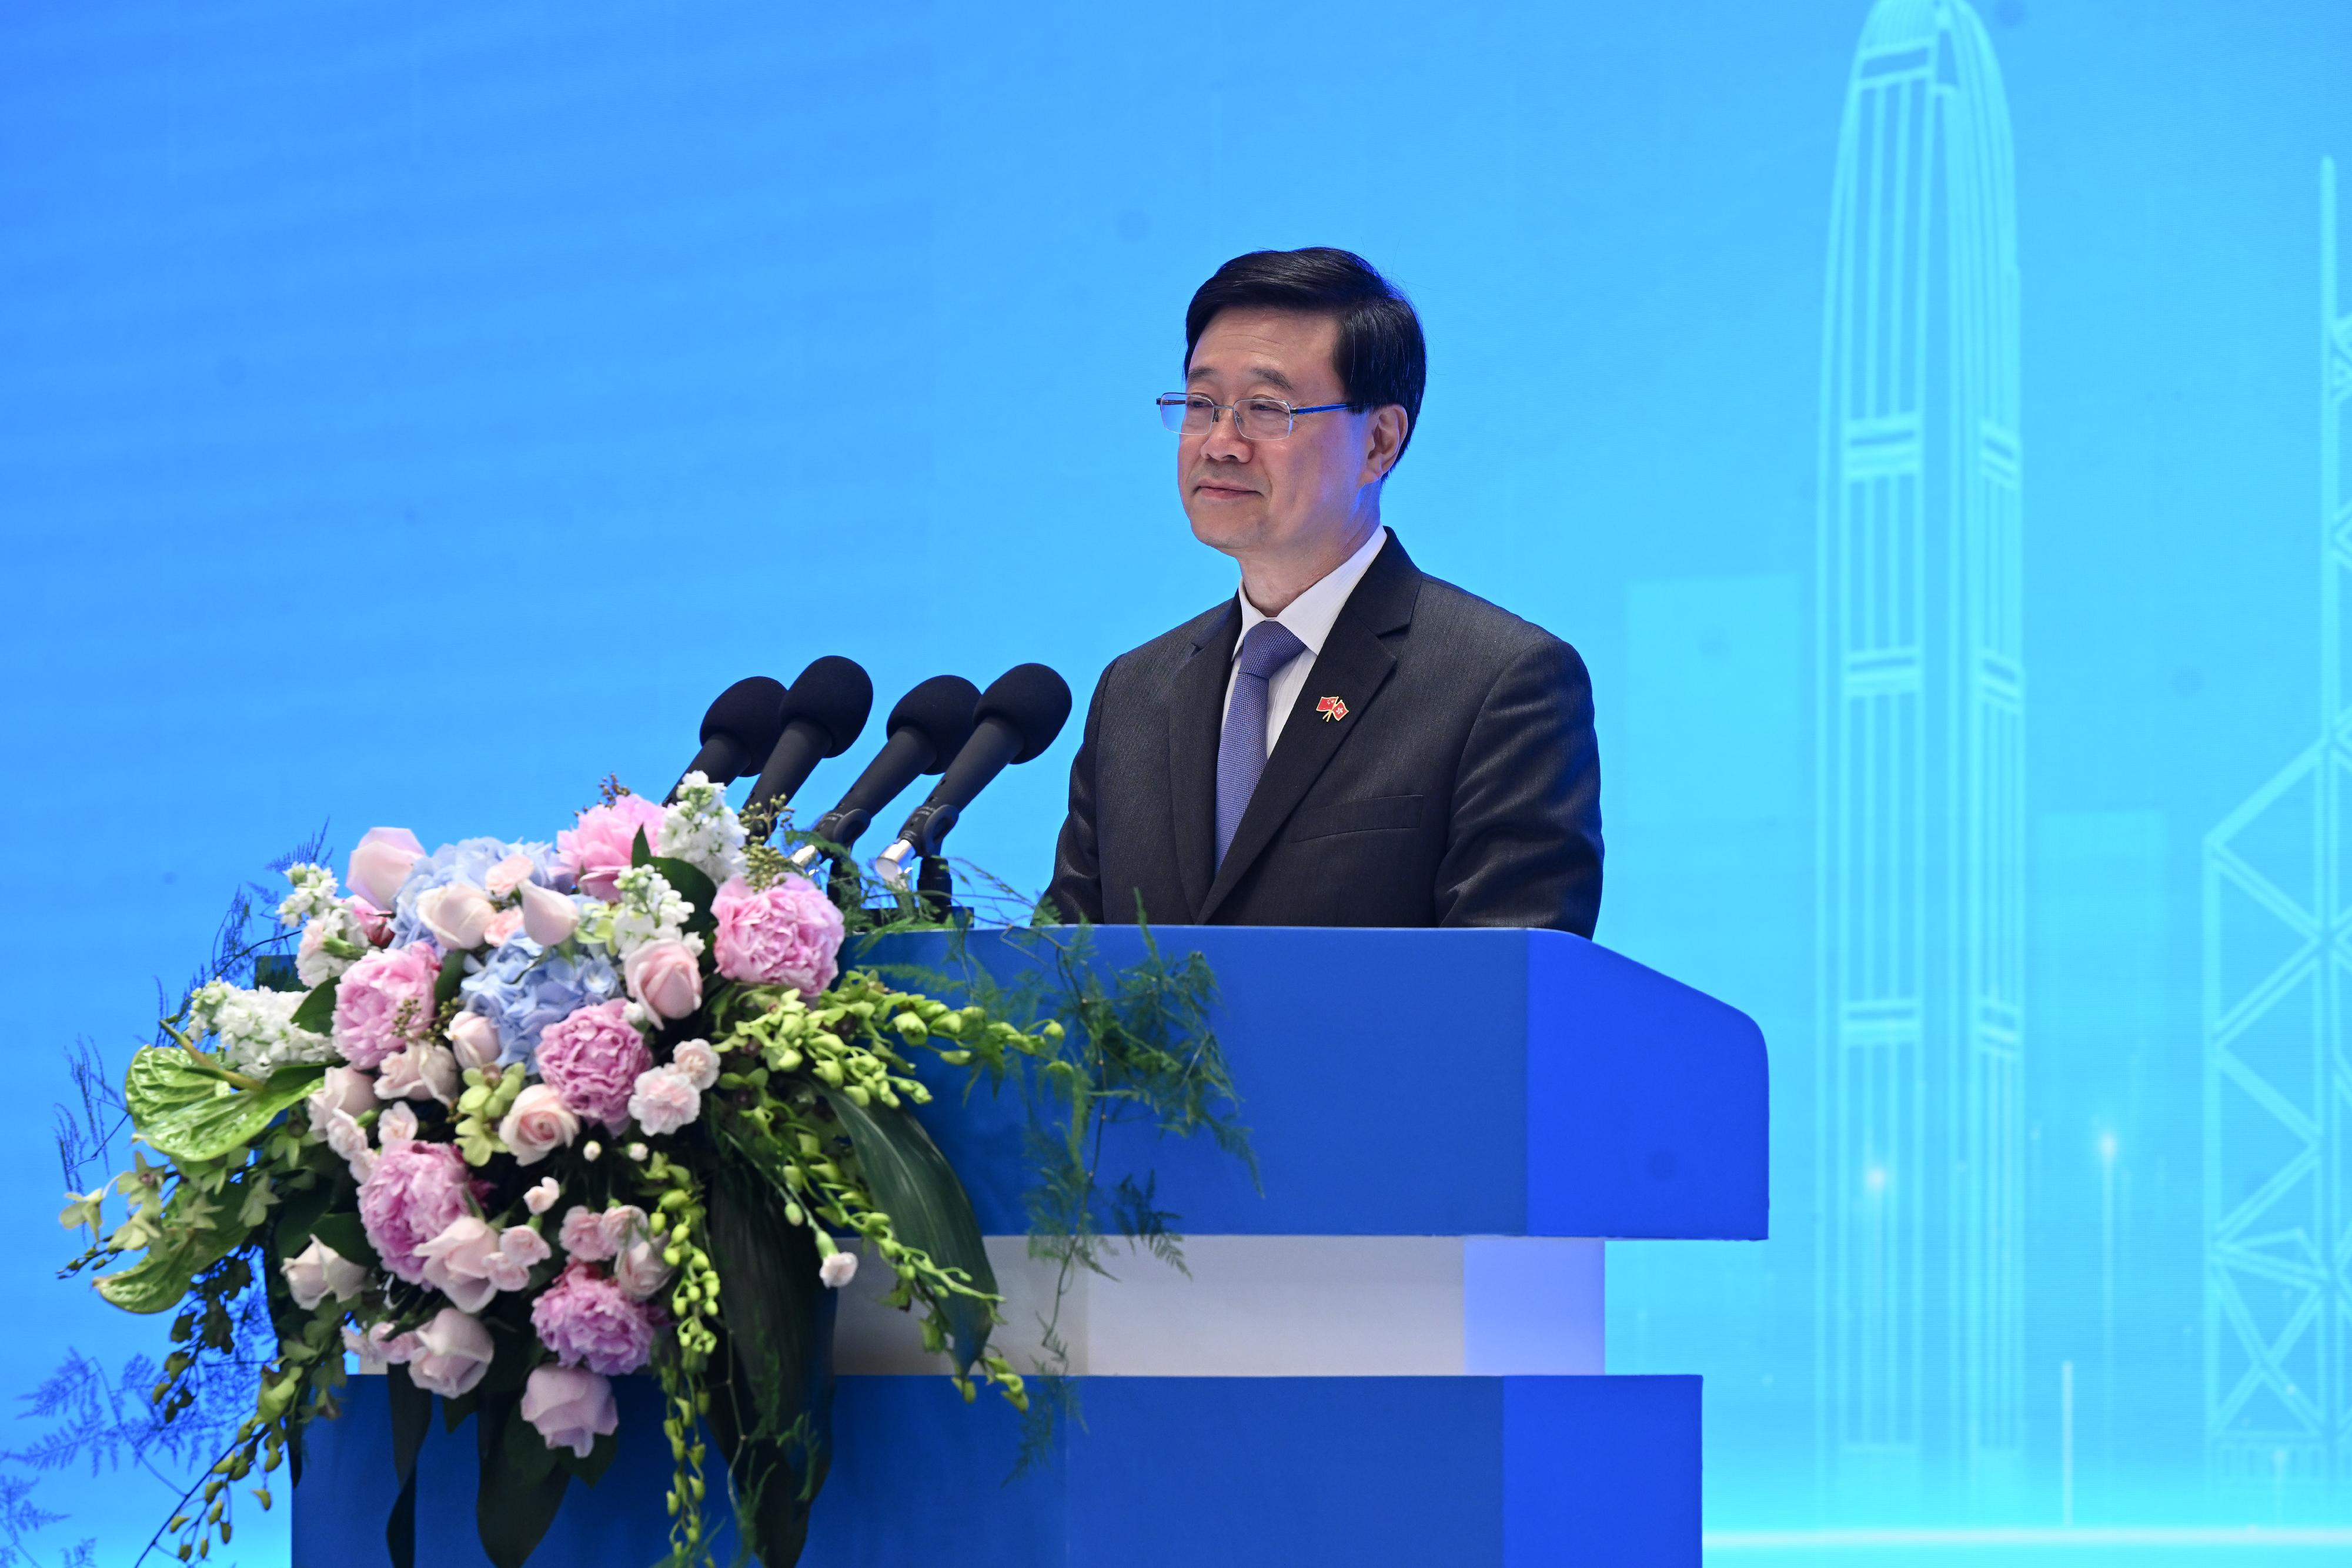 The Chief Executive, Mr John Lee, led a delegation of the Hong Kong Special Administrative Region Government and the Legislative Council to visit Guangdong-Hong Kong-Macao Greater Bay Area in Guangzhou today (April 24). Photo shows Mr Lee speaking at the luncheon with leaders of Guangzhou Municipal Government.